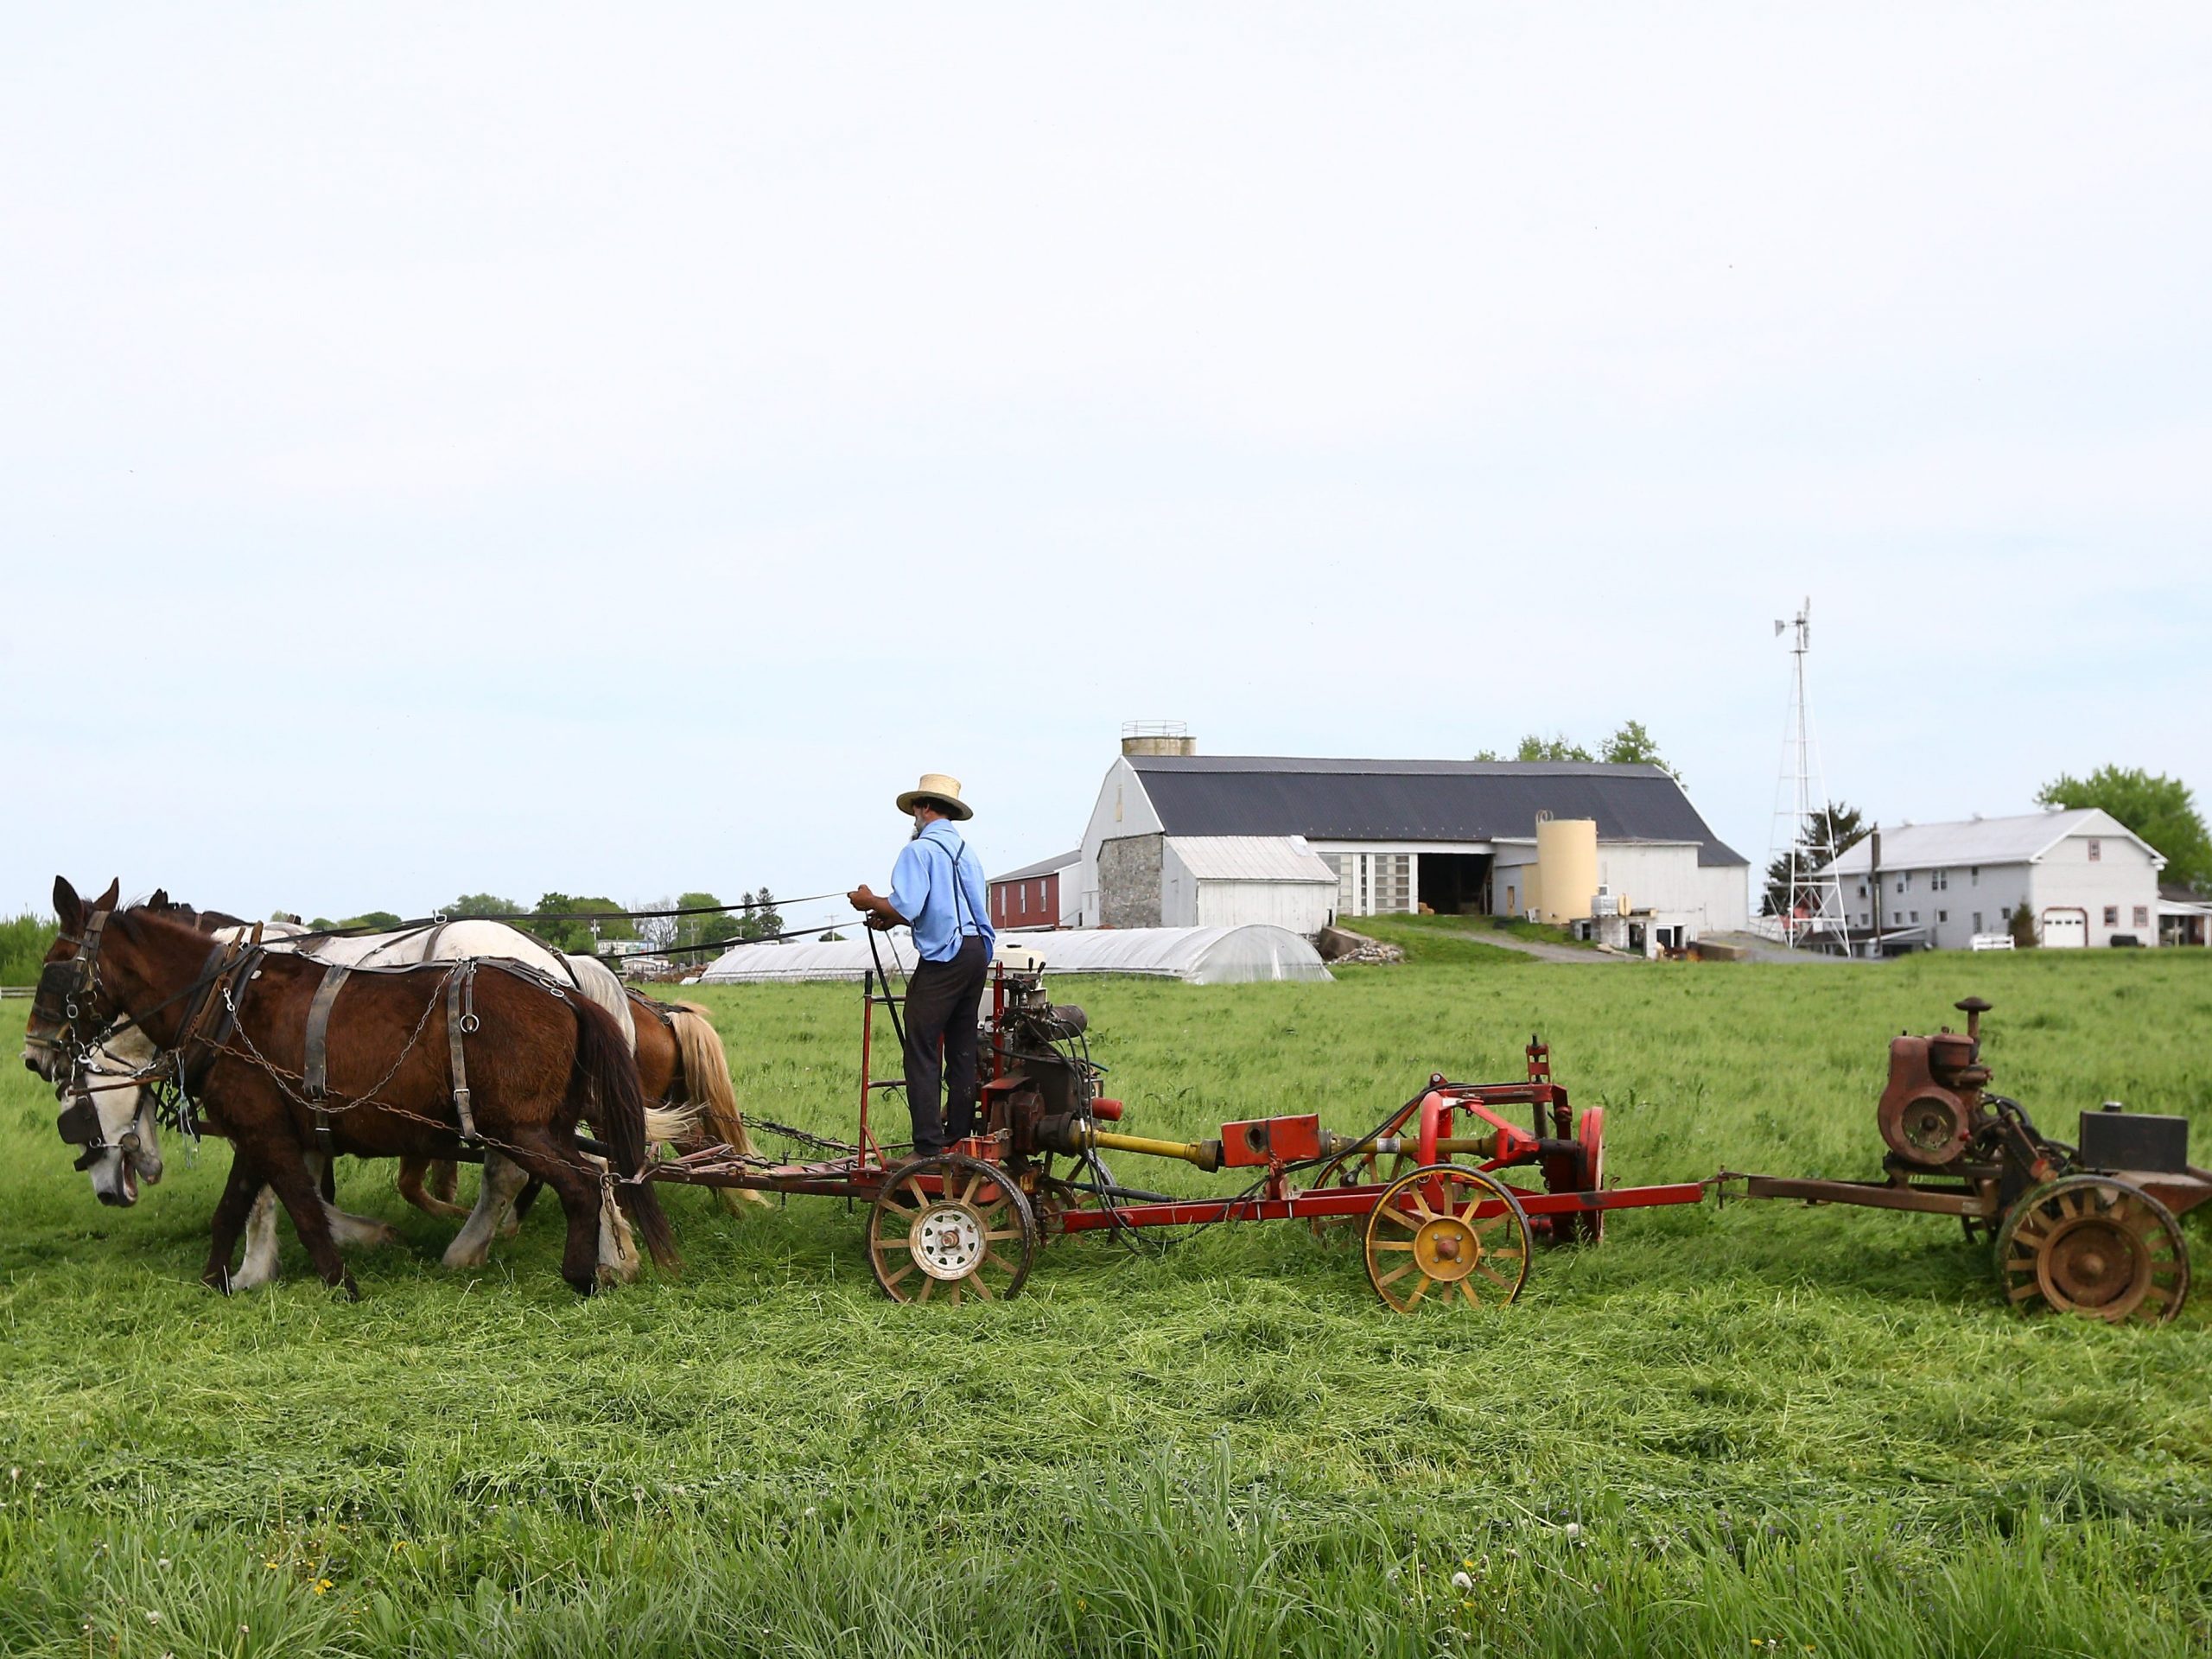 Amish farmer uses horsepower to plow the soil in Central Pennsylvania.